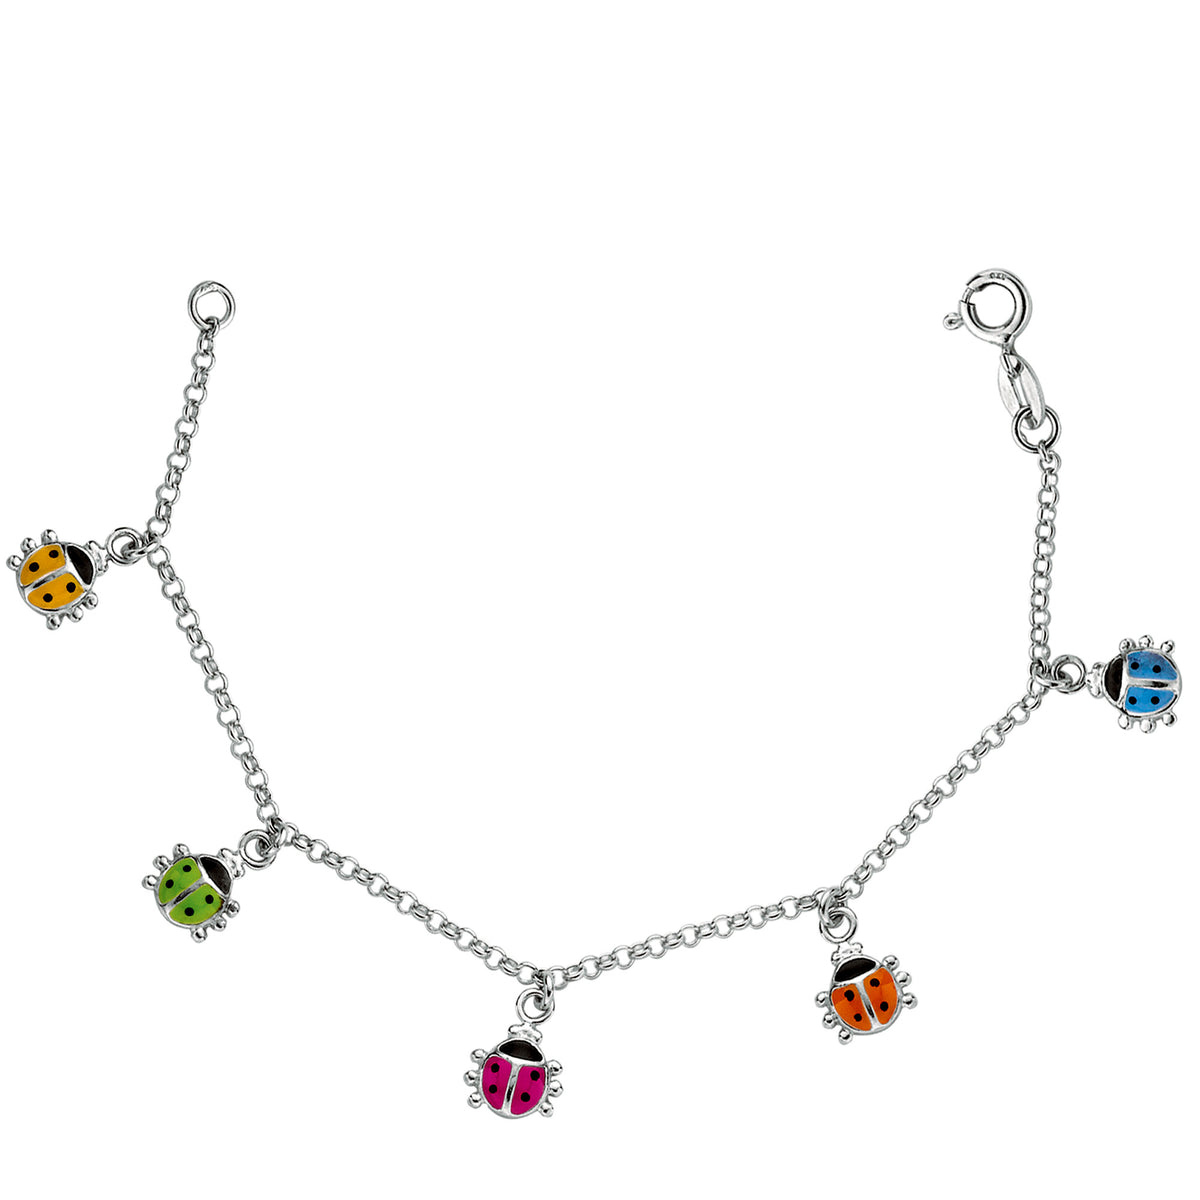 Baby Bracelet With Colorful Dangling Ladybug Charms In Sterling Silver - 6 Inches fine designer jewelry for men and women